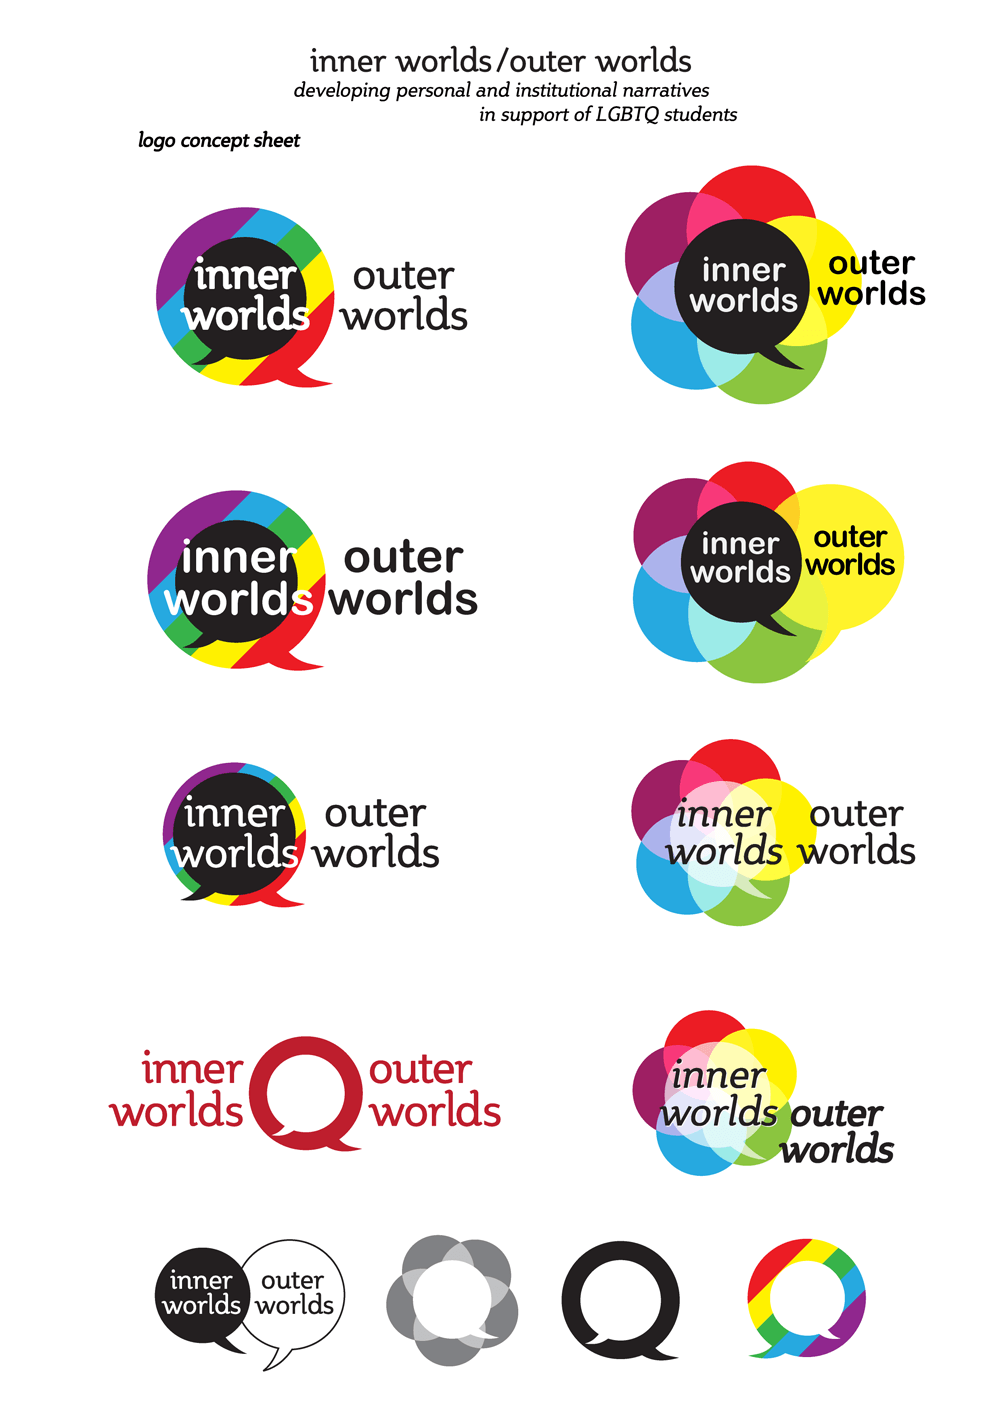 Conference Logo - Inner Worlds, Outer Worlds conference logo design sketches ...